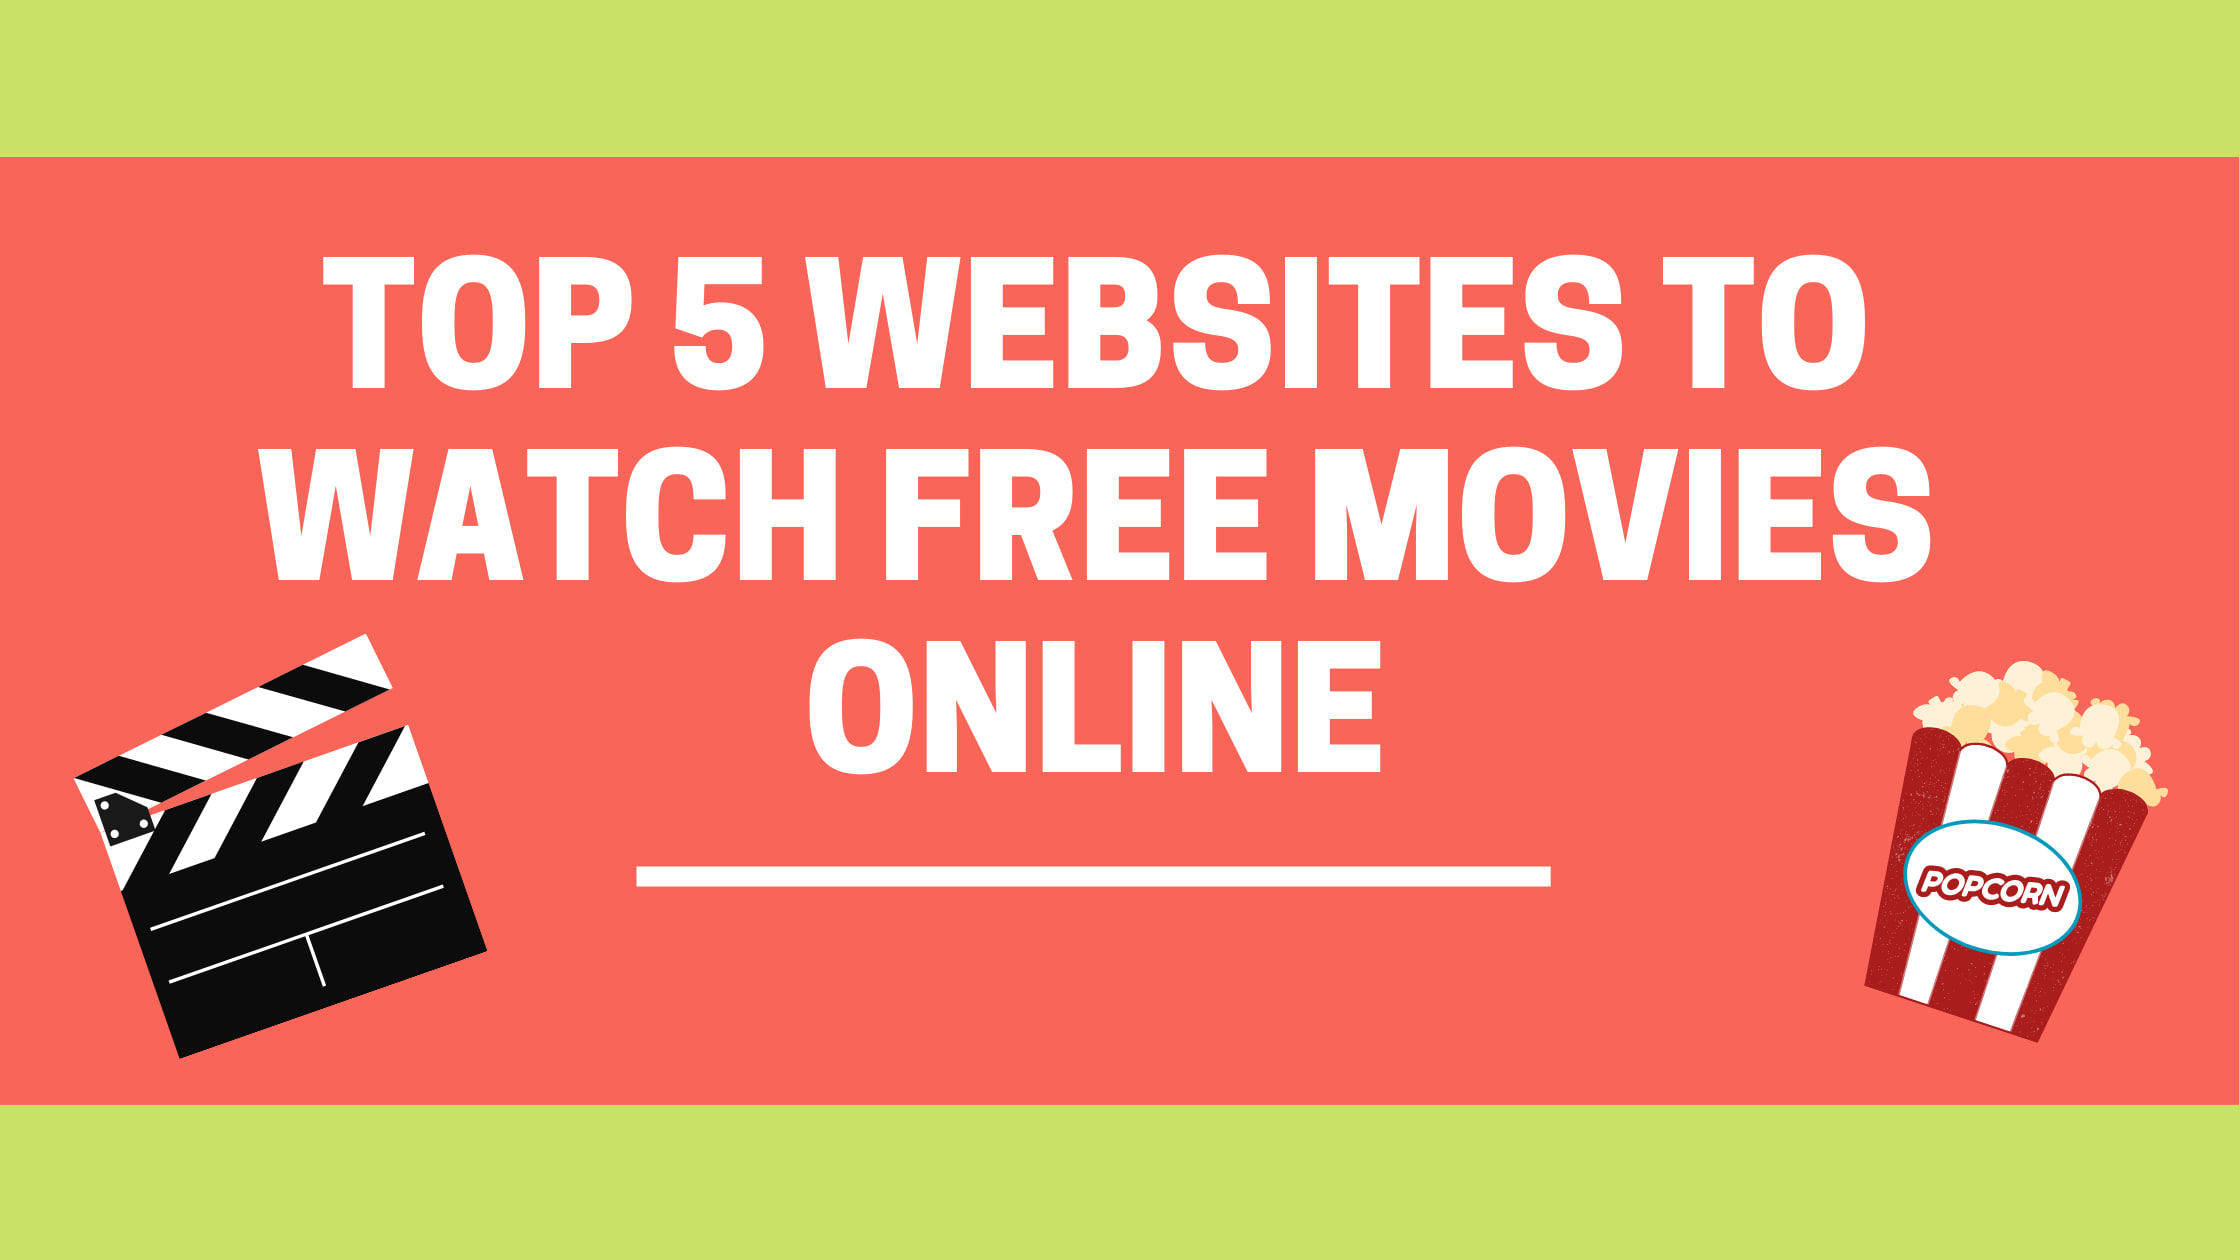 online free movies to watch, online free movies sites